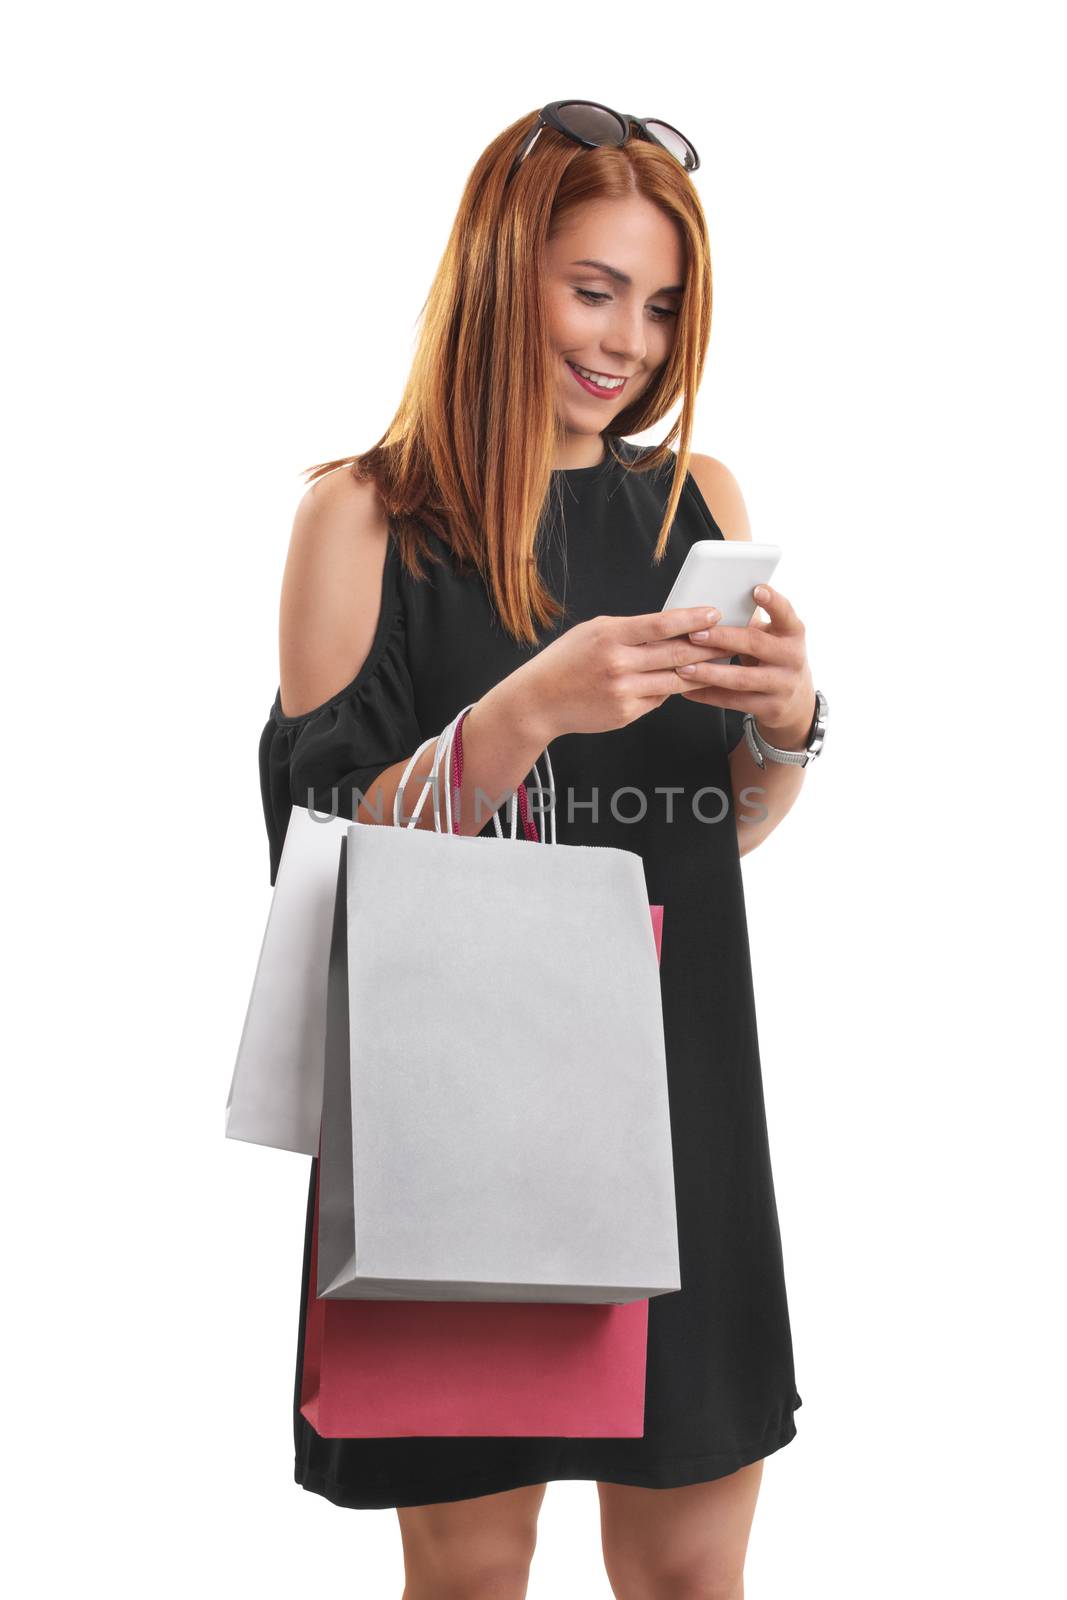 Girl with shopping bags typing on her phone by Mendelex